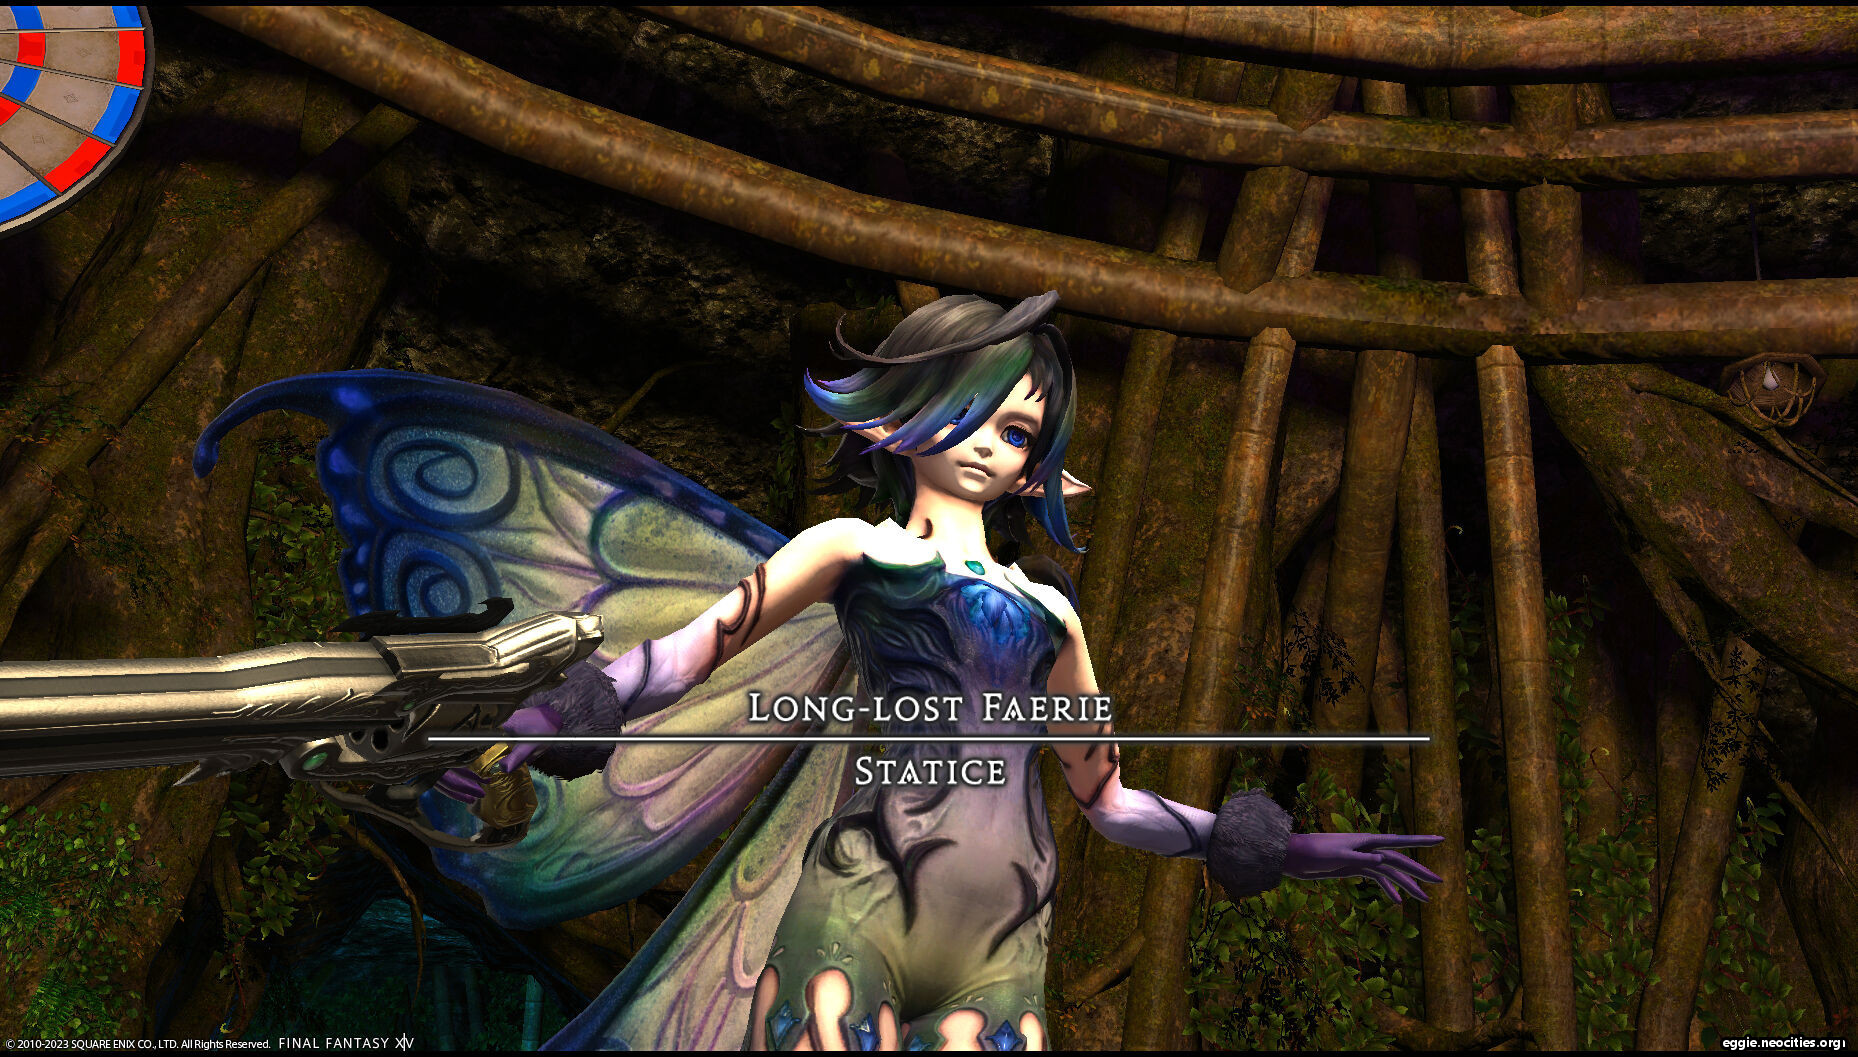 Statice boss from Aloalo dungeon. The text reads Long-lost Faerie Statice